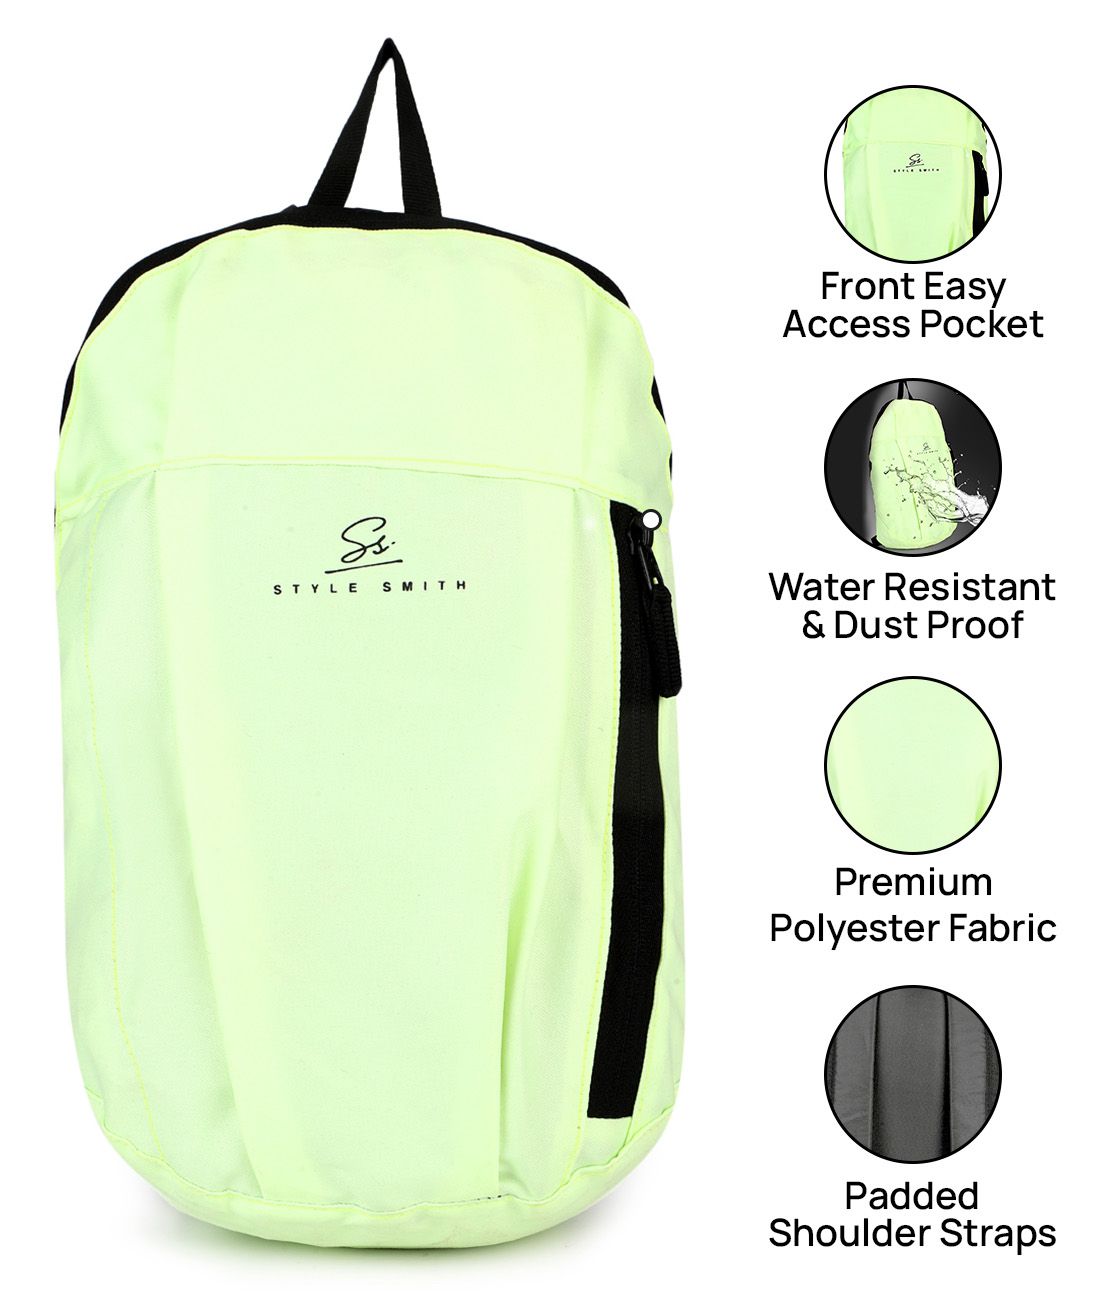     			Style Smith - Light Green Polyester Casual Backpack Bag (10 Ltrs)